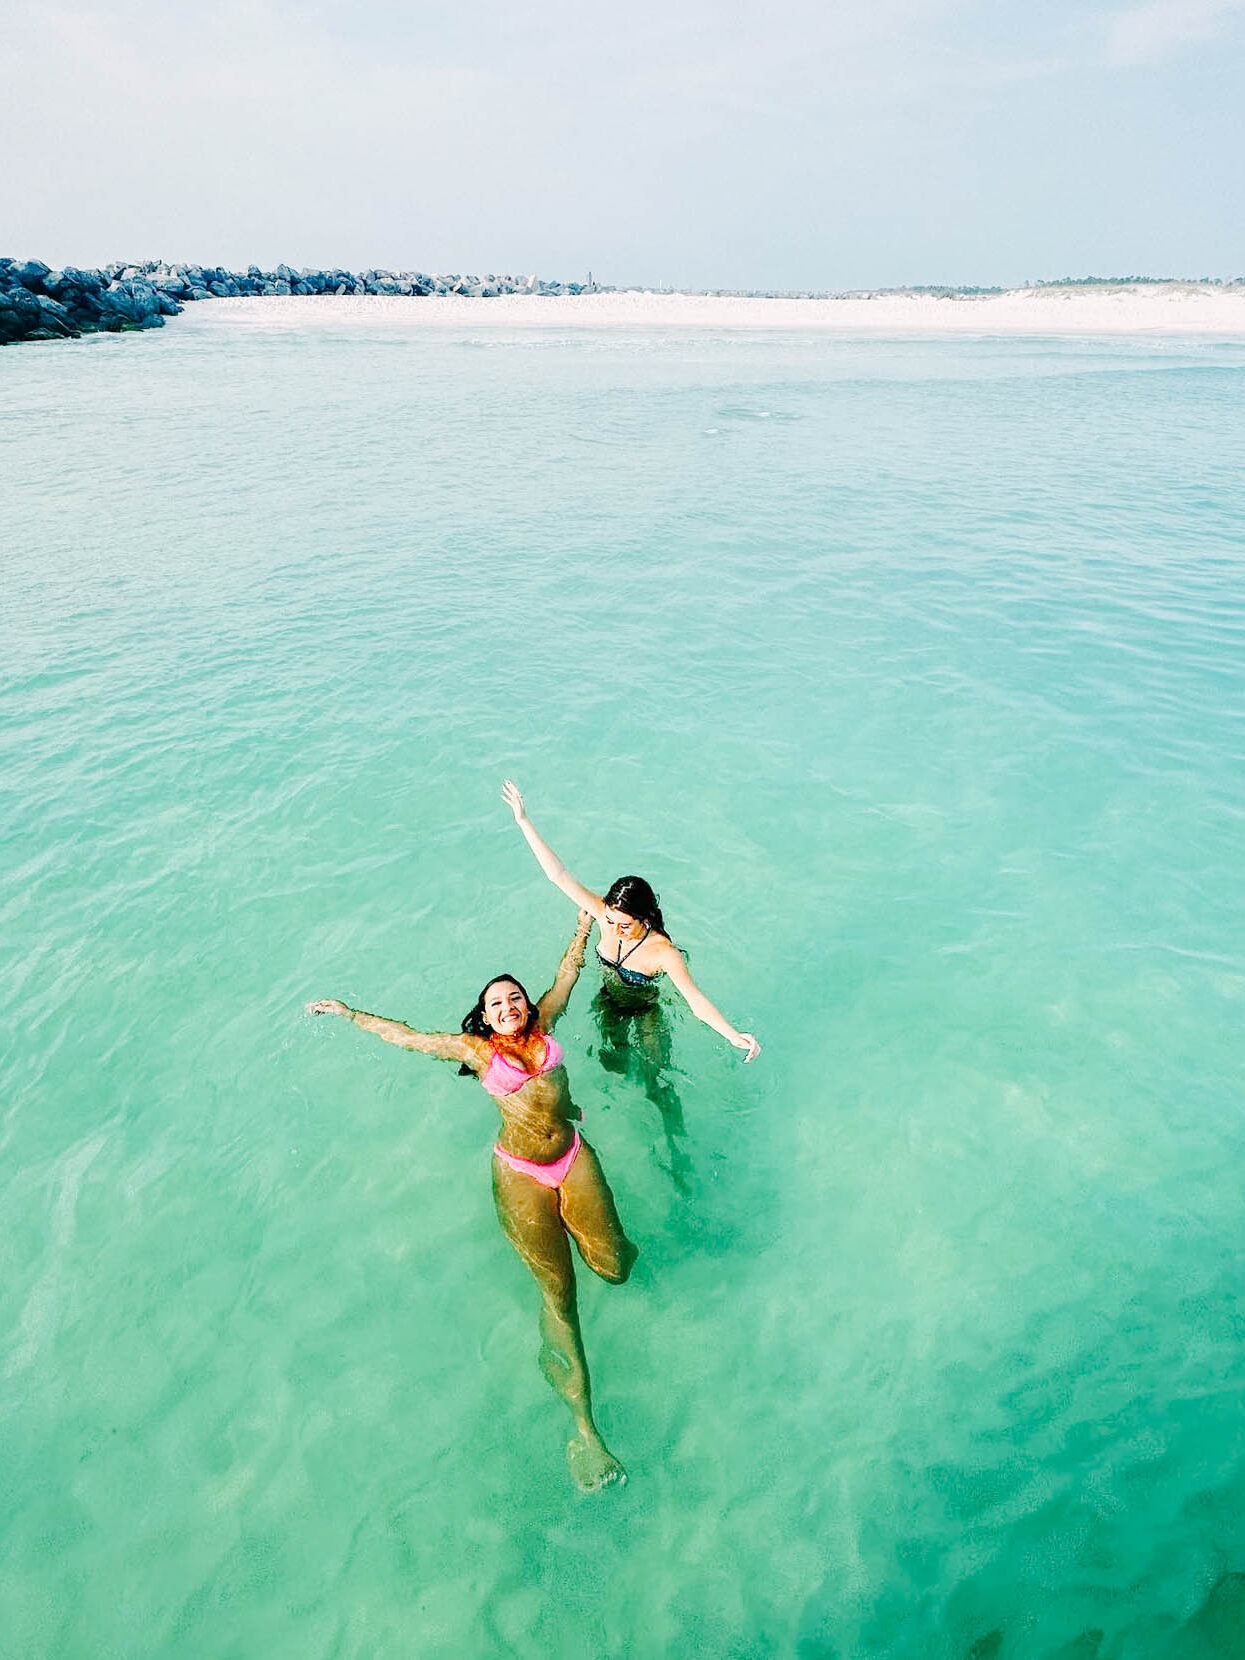 Most Instagrammable Places in Panama City, Florida